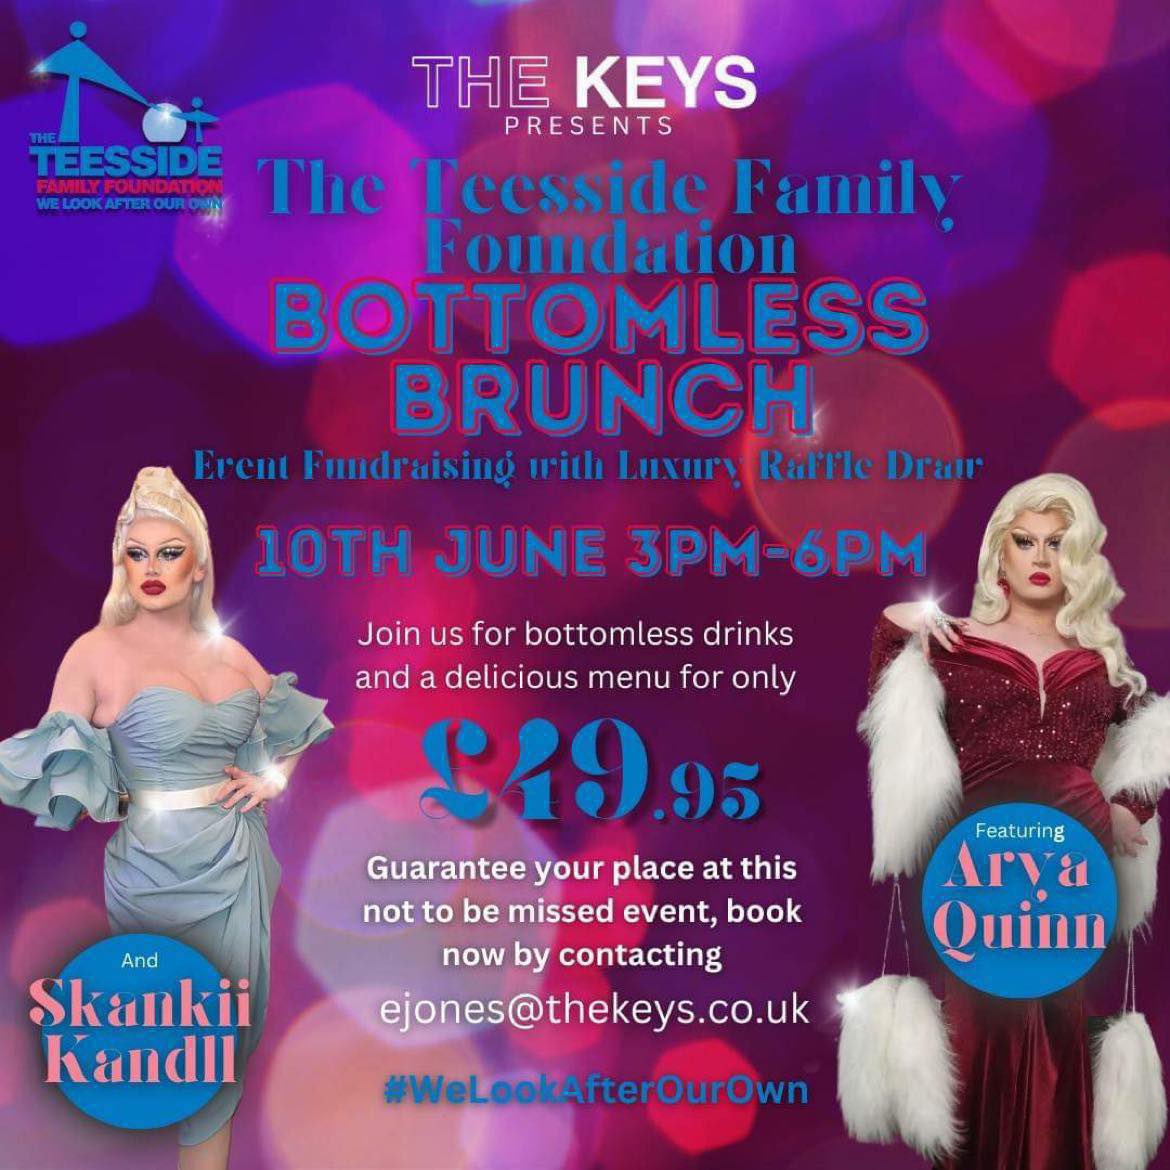 NEW TTFF Bottomless Brunch 🍾💃🎵 Did we say !! 'Bottomless Brunch' at The Keys, Yarm Tickets are £49,95 each Booking directly to Emily at the Keys. Book tickets here 👇 ejones@thekeys.co.uk Limited tickets available #TTFF #TheKeysYarm #BottomlessBrunch #Fundraising